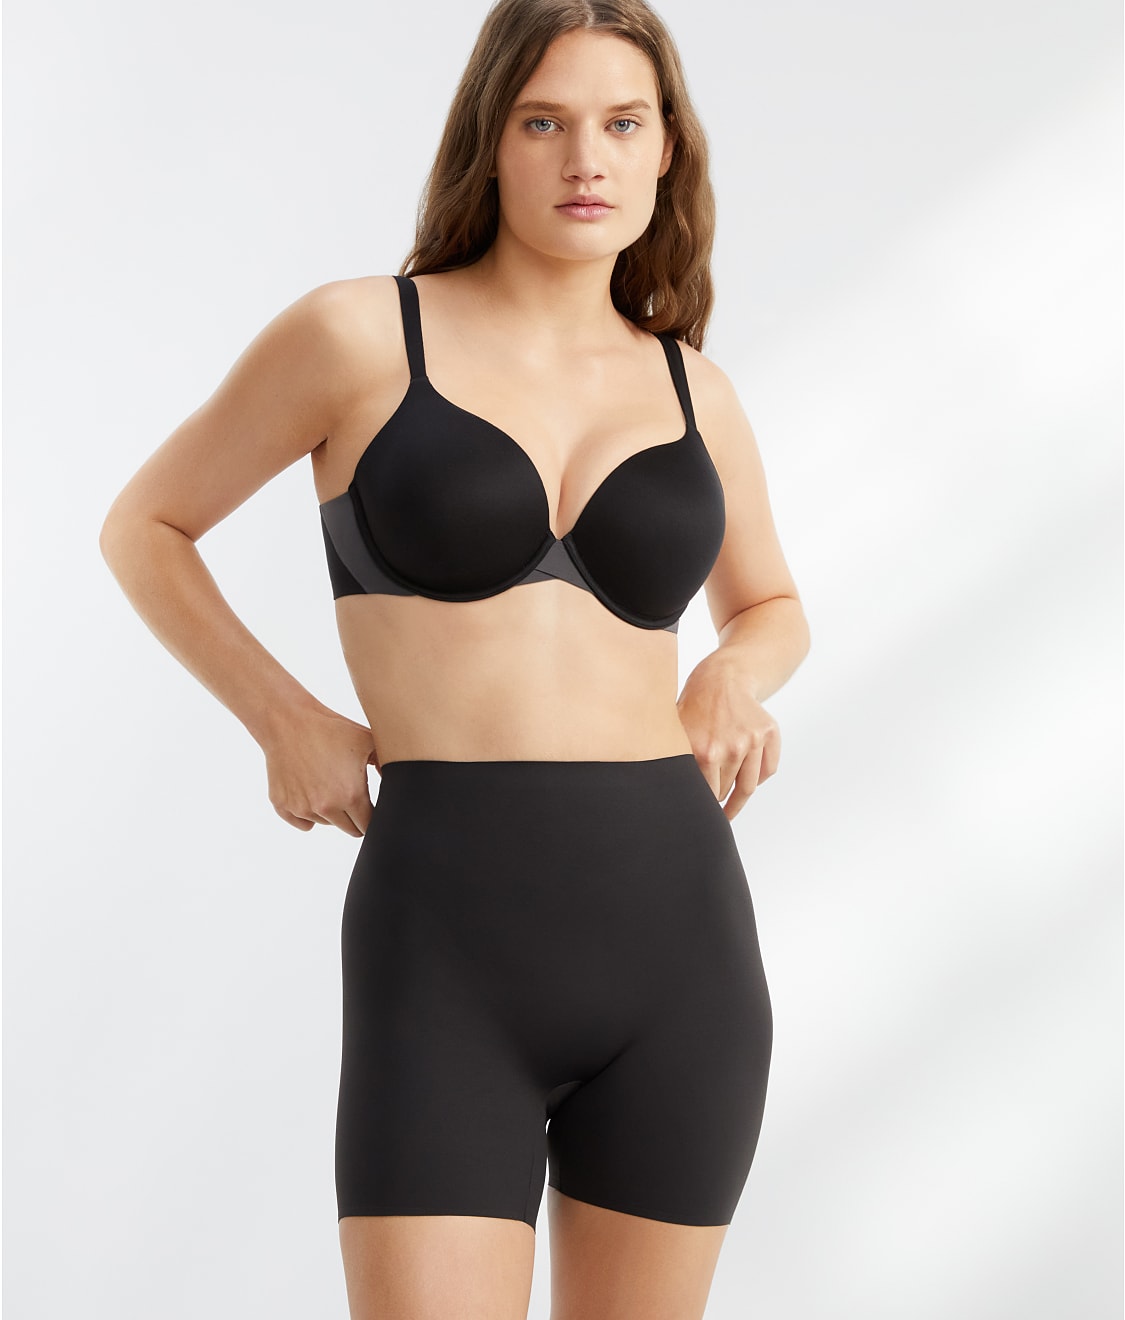 Get a Sleek Look with Shapewear Cycling Shorts, by Cycling Shop UK